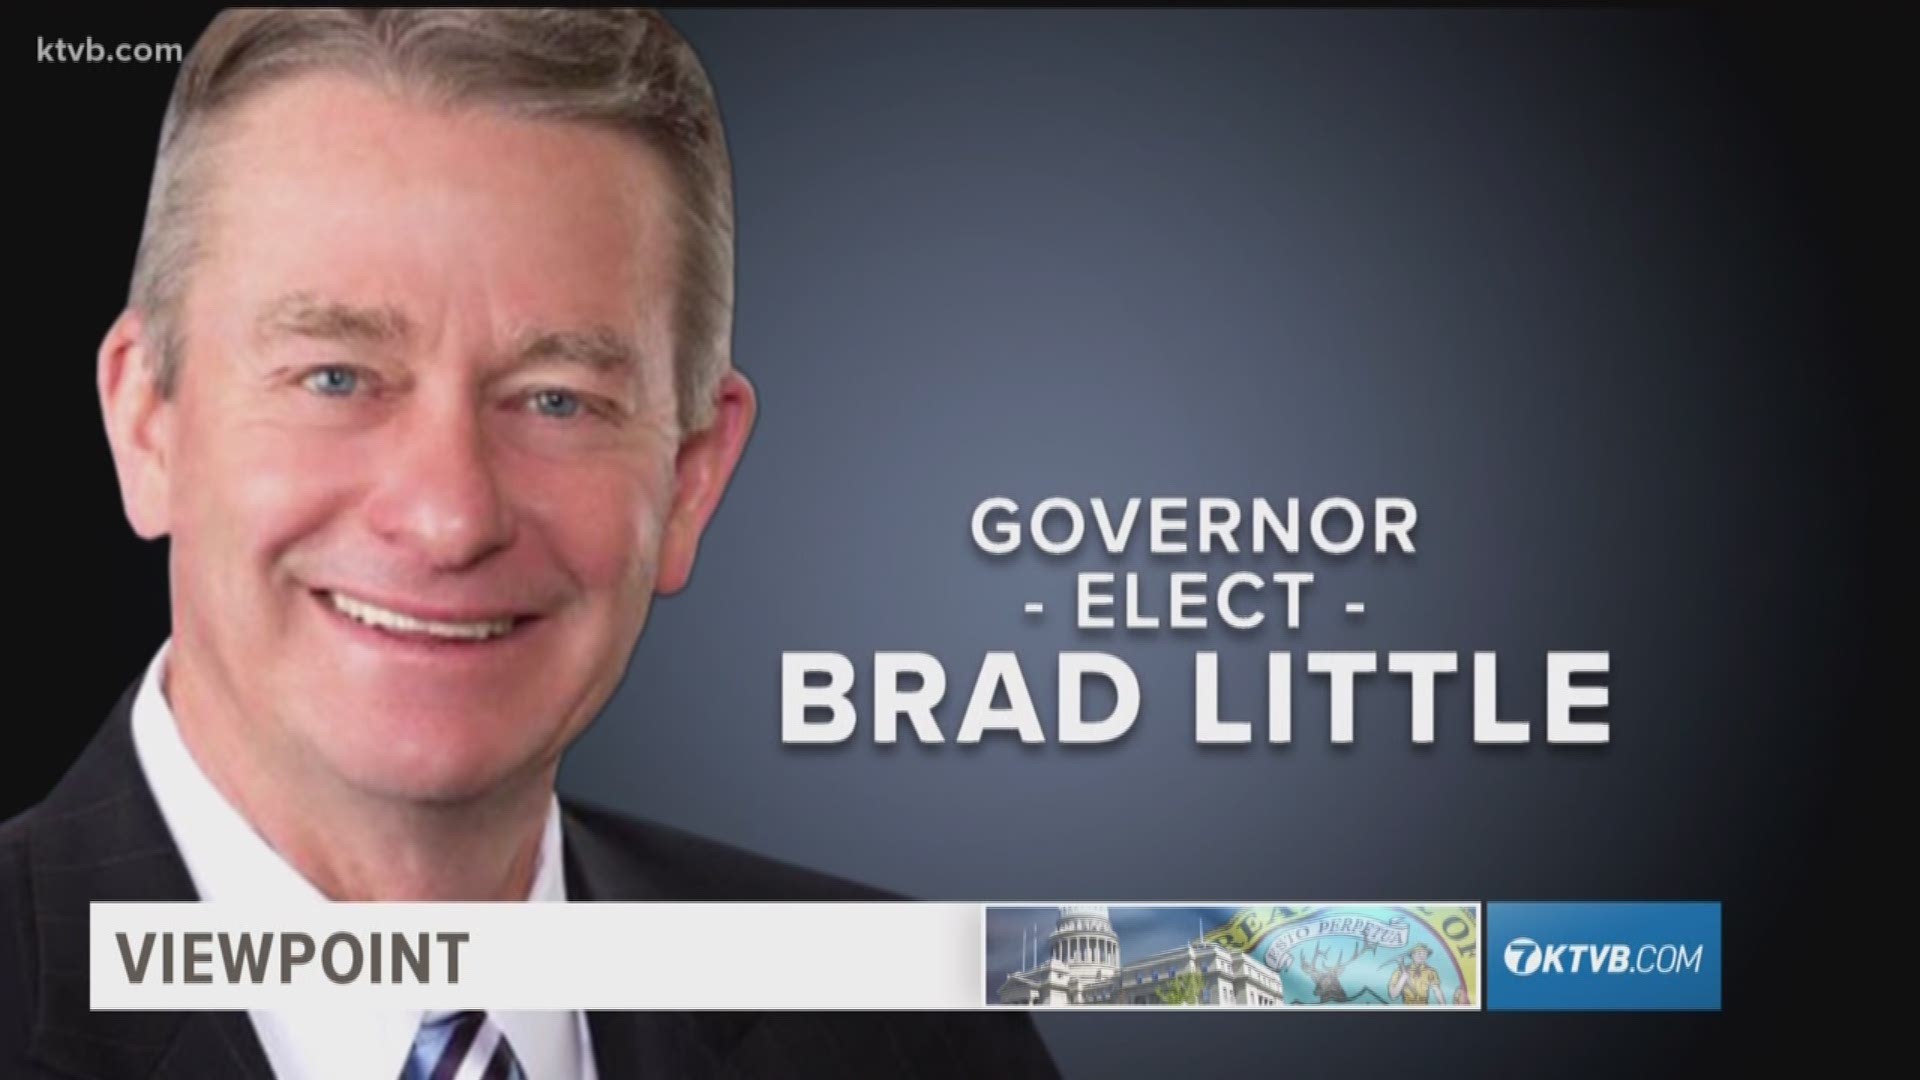 In the first time in 12 years, Idaho welcomes in a new governor after Republican Lt. Gov. Brad Little was elected to Idaho's highest office last month. Doug Petcash sits down with Gov.-Elect Brad Little to discuss what he has done to prepare to become Idaho's 33rd governor and how he will tackle Medicaid expansion after Prop 2 was passed by voters last month. The gubernatorial inauguration ceremony to officially welcome Idaho's new governor will take place on Friday, Jan. 4.